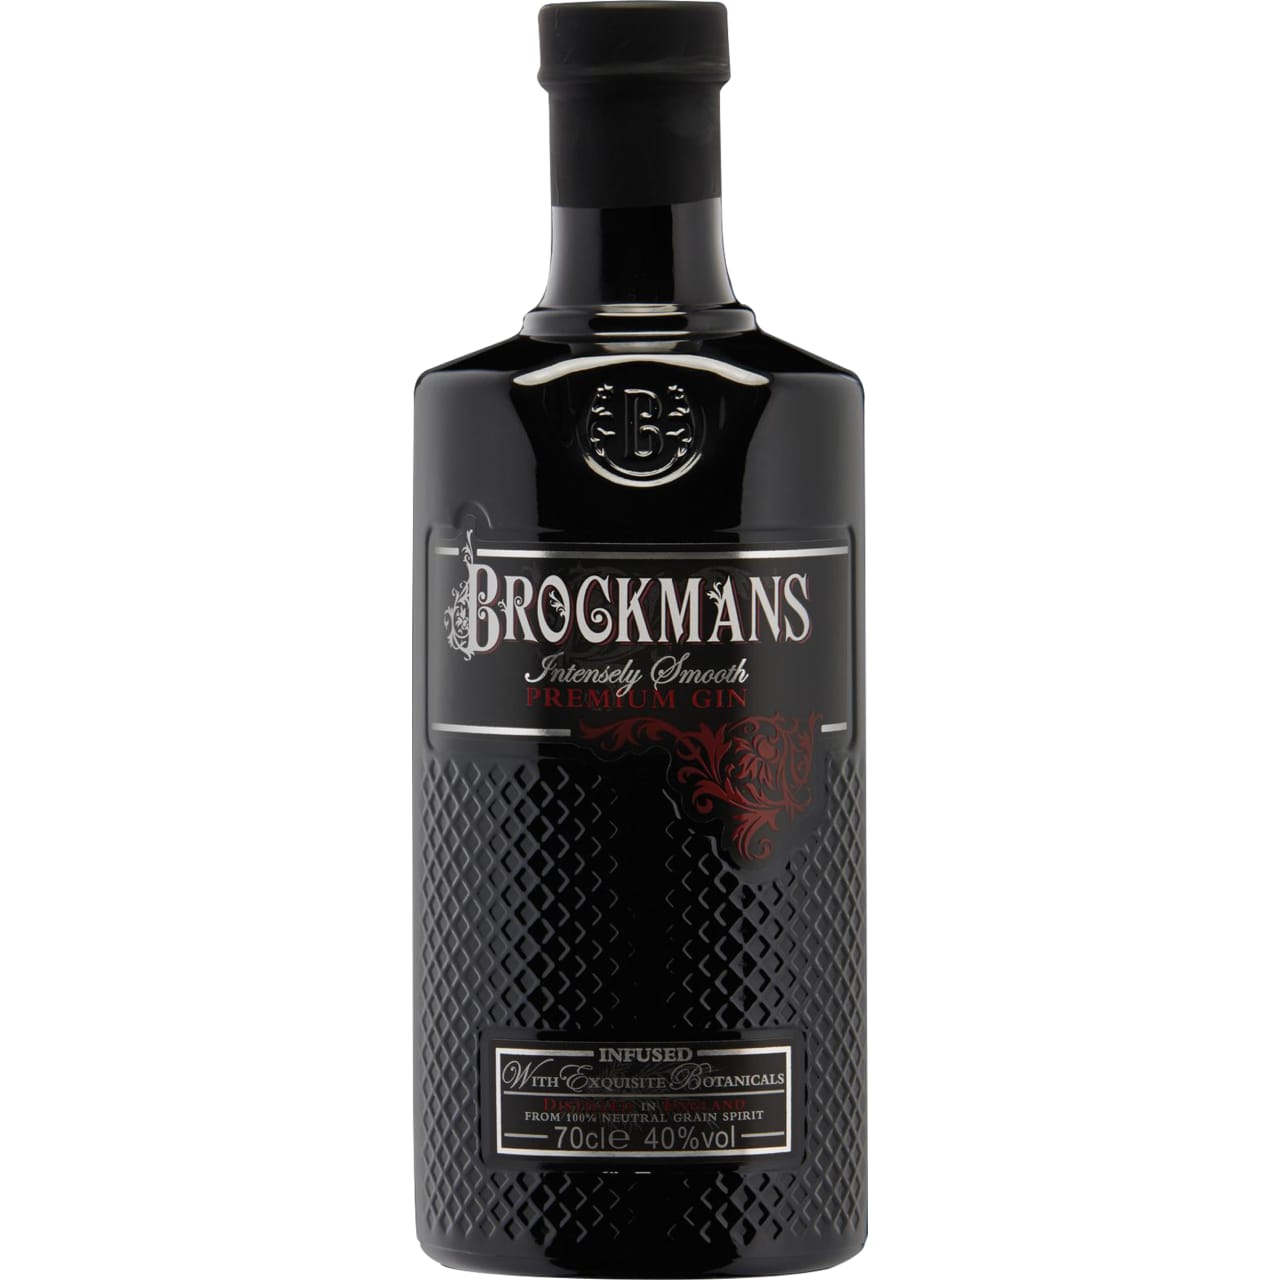 Product Image - Brockmans Intensely Smooth Gin